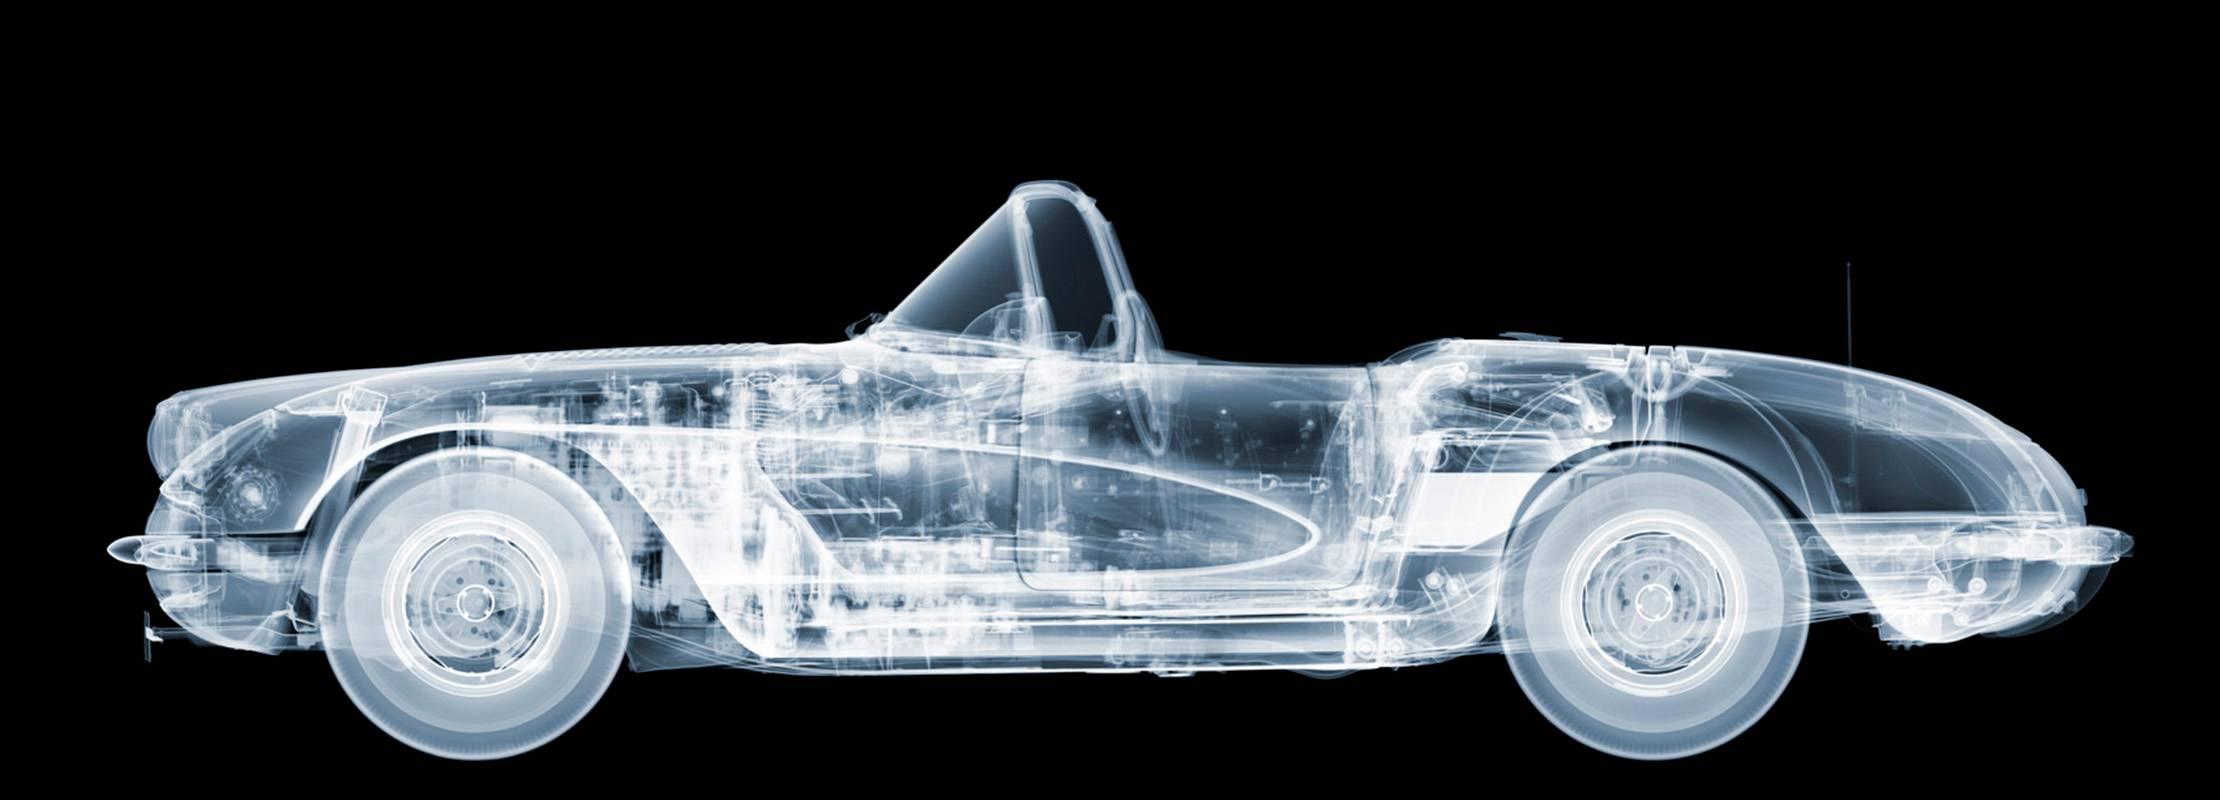 Nick Veasey Abstract Photograph - 1958 Corvette C1